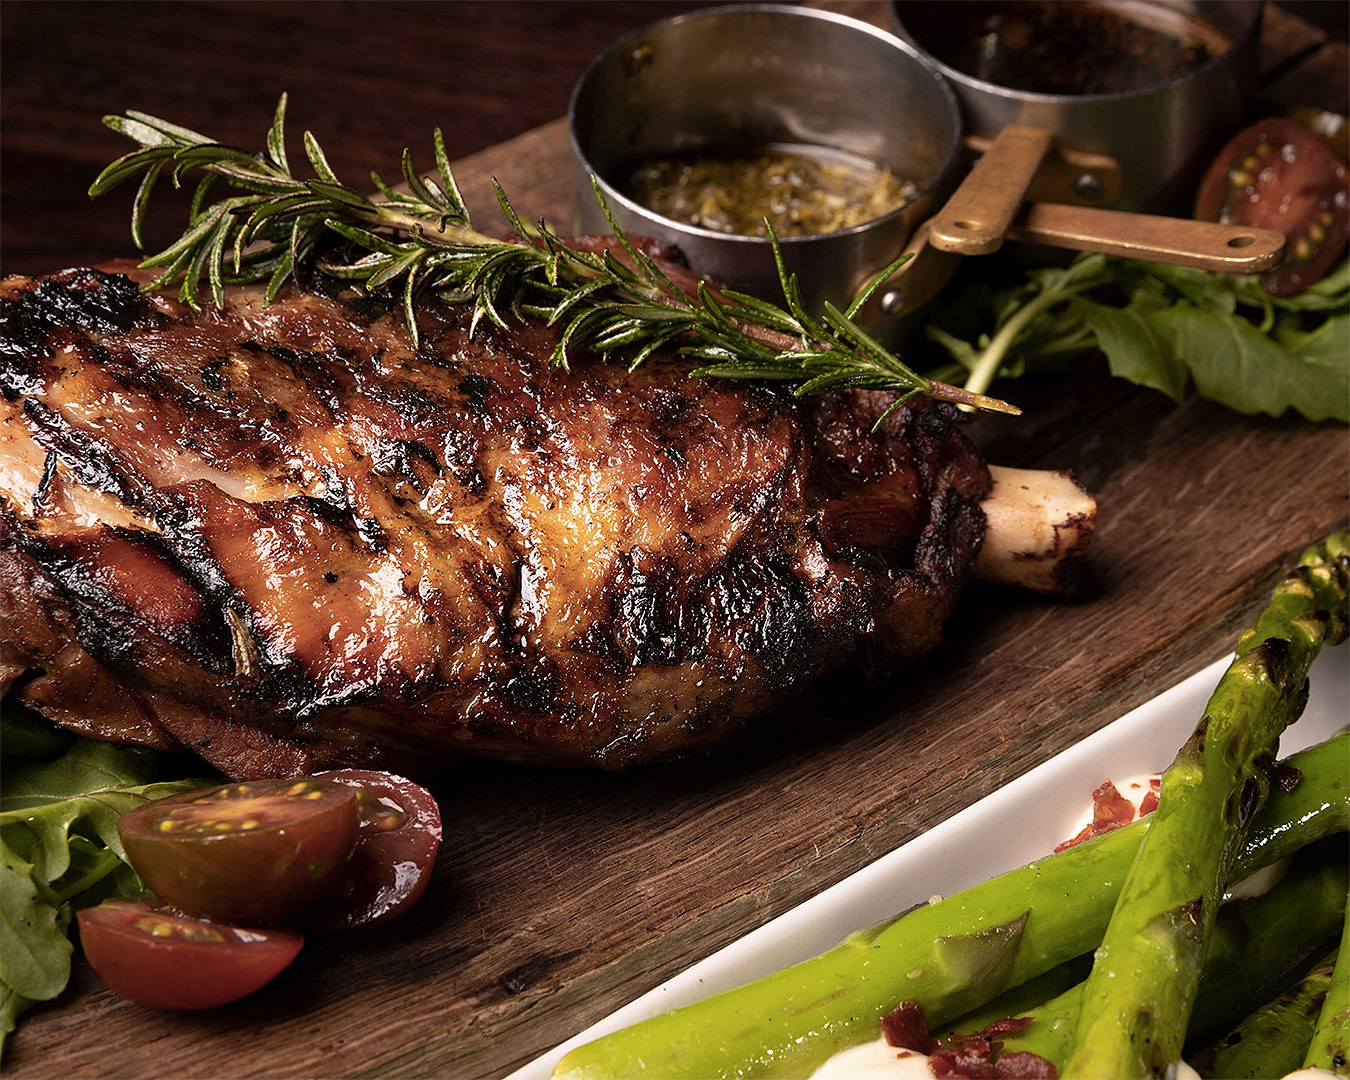 A sumptuous meal of grilled lamb with veggies on the side served at The Grille, one of Queenstown's best restaurants.